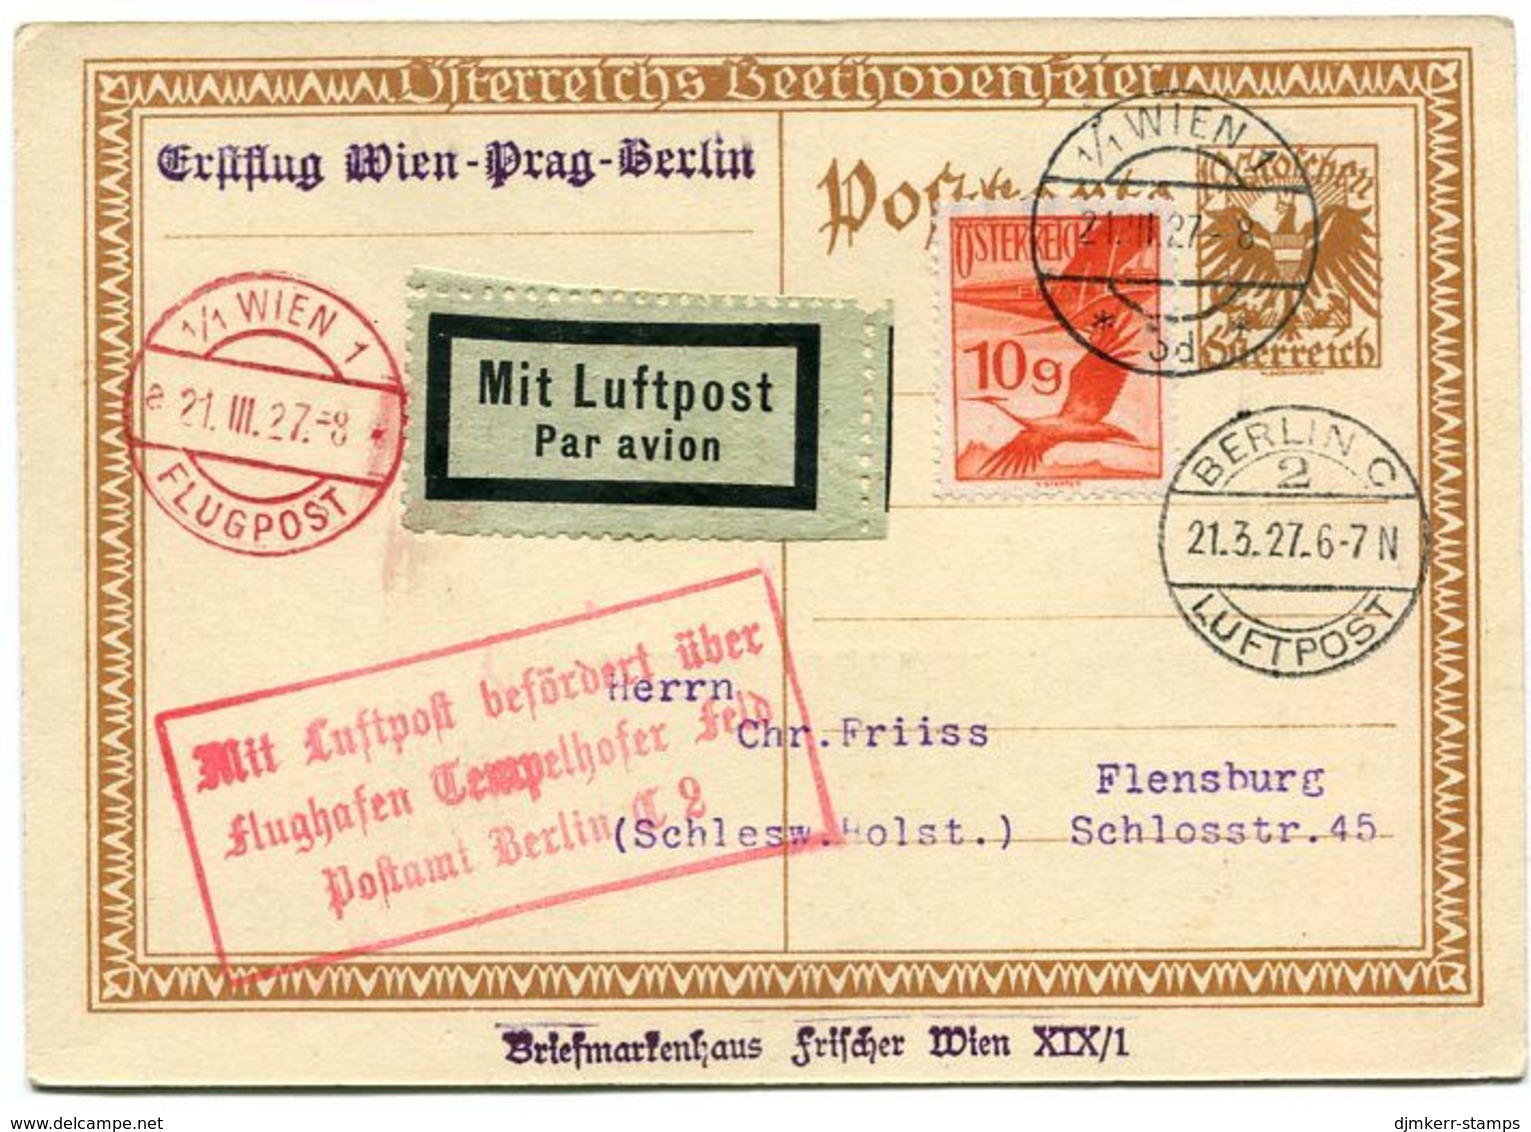 AUSTRIA 1927 First Flight Wien-Prague-Berlin On Postcard.  Beethoven Commemoration On Obverse. - Covers & Documents